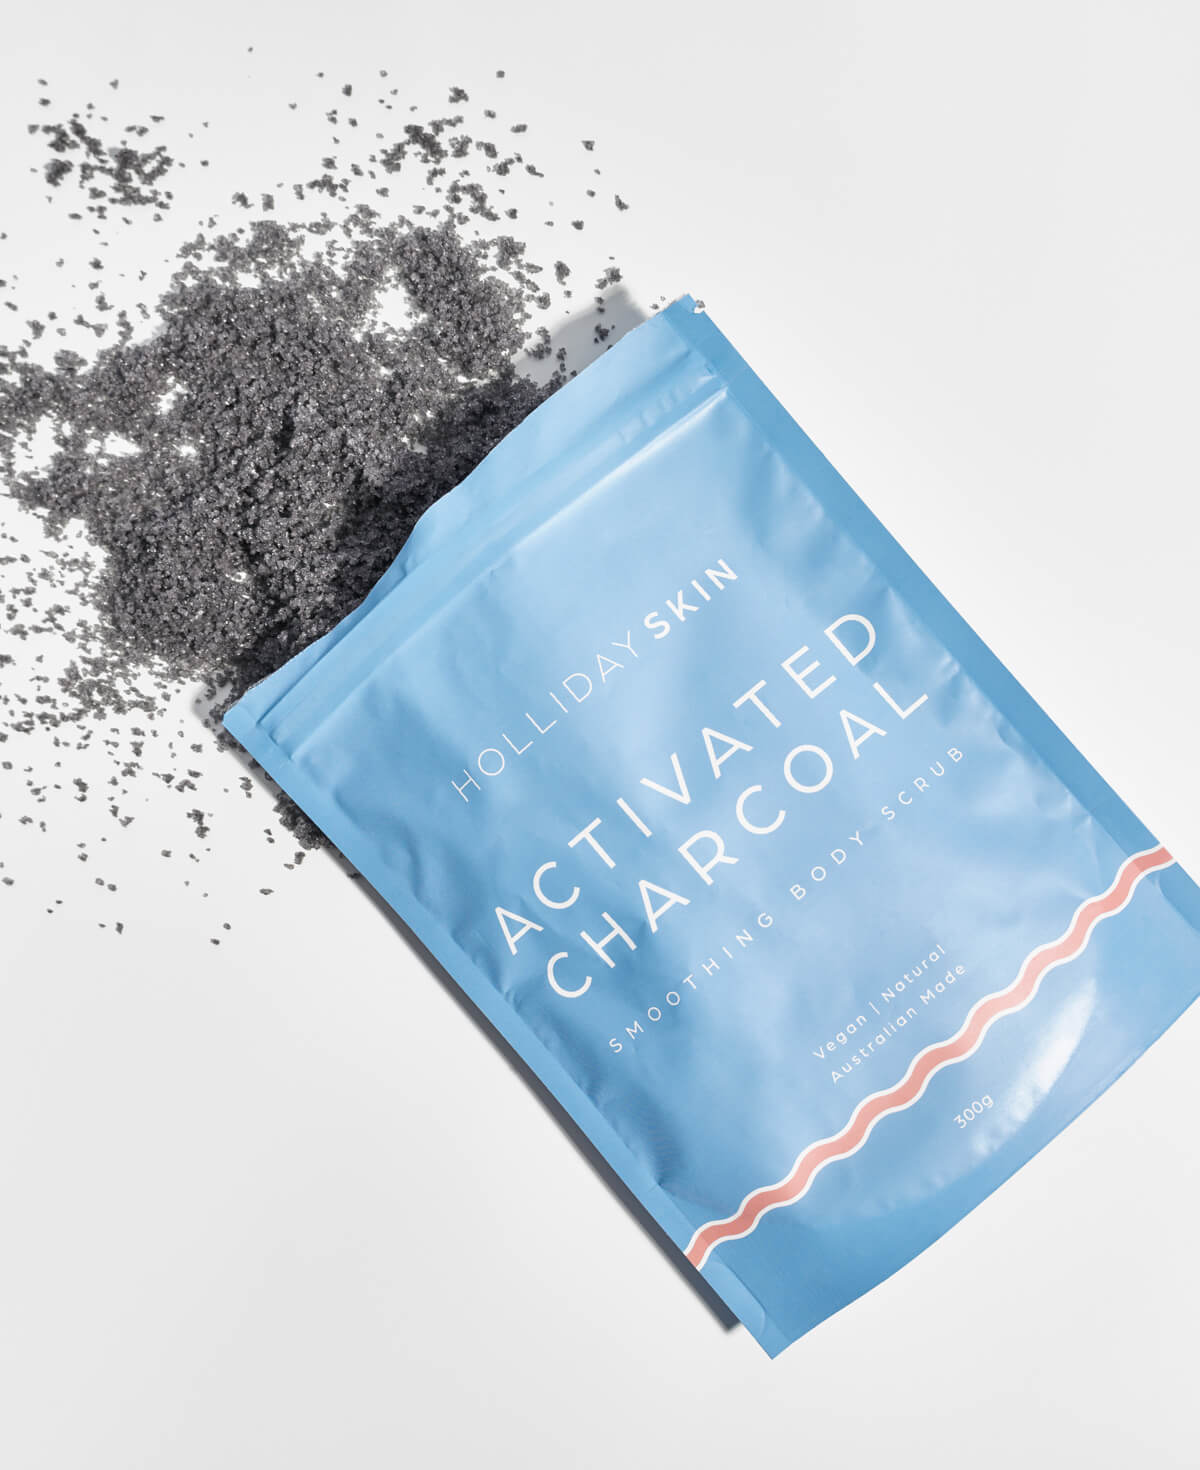 Activated Charcoal Smoothing Body Scrub